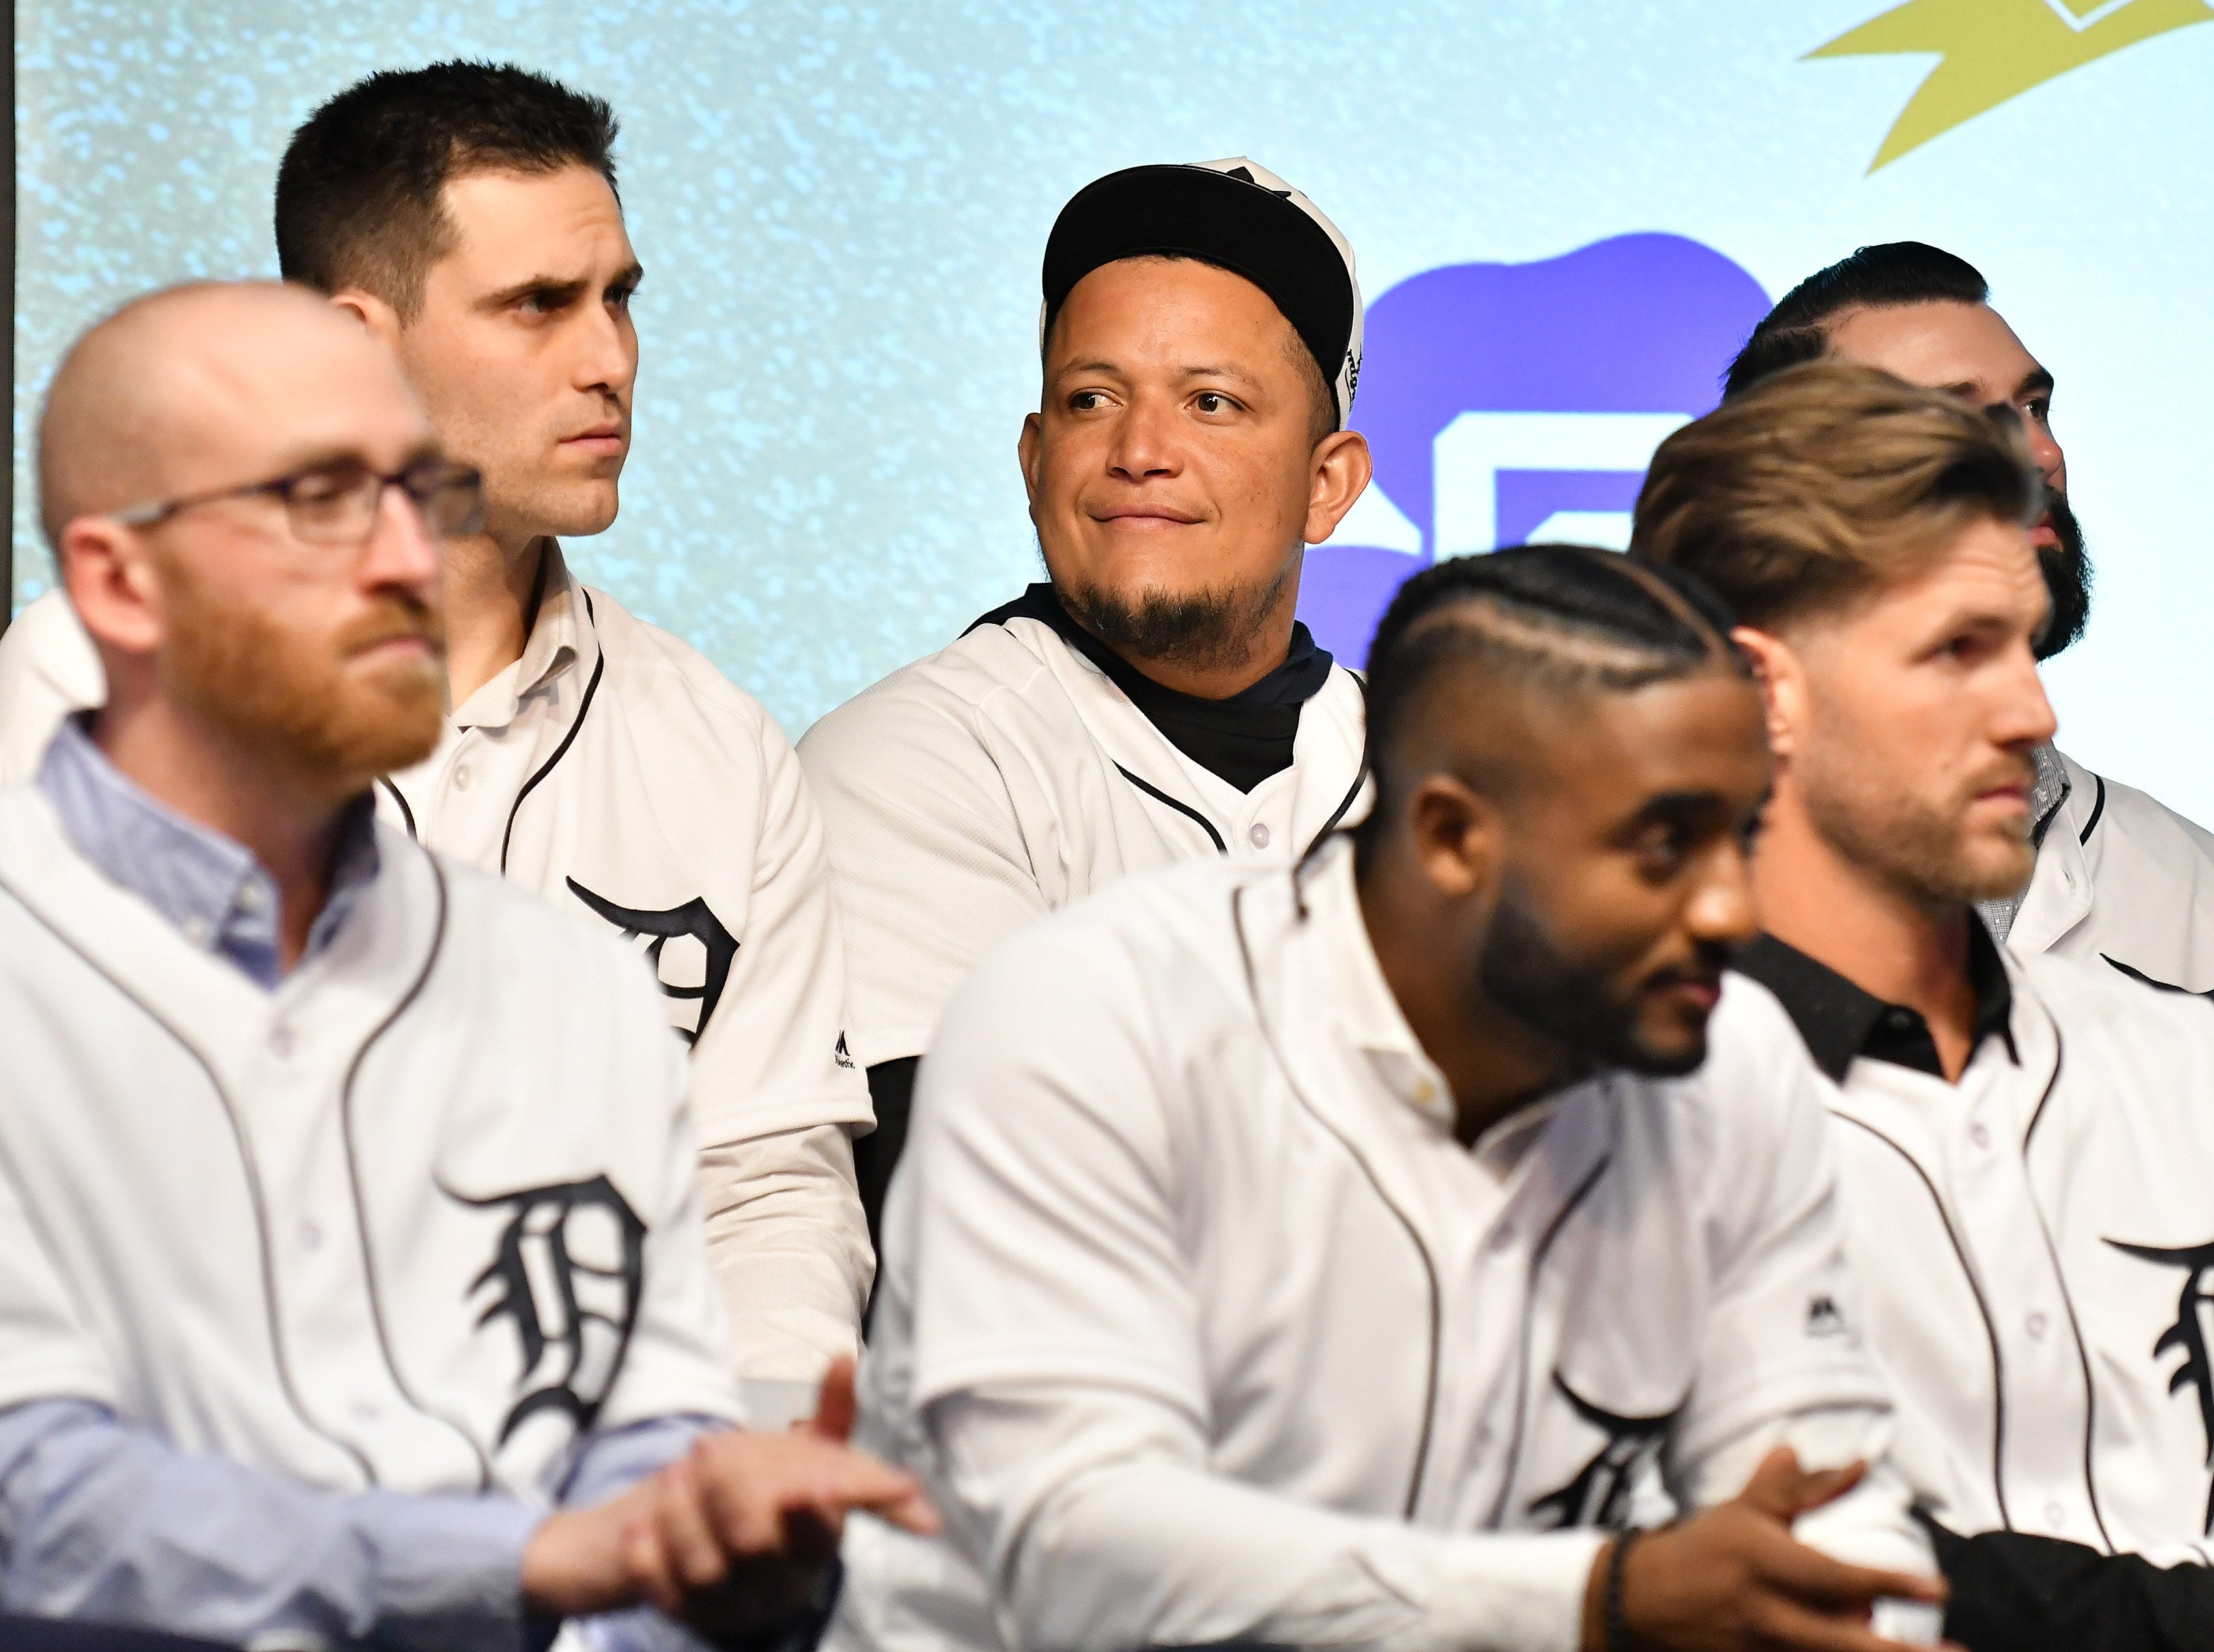 Tigers' Miguel Cabrera with pitcher Matthew Boyd, left, during a stop on the 2019 Detroit Tigers Winter Caravan at the Novi Civic Center in Novi, Mich. on Jan. 24, 2019.